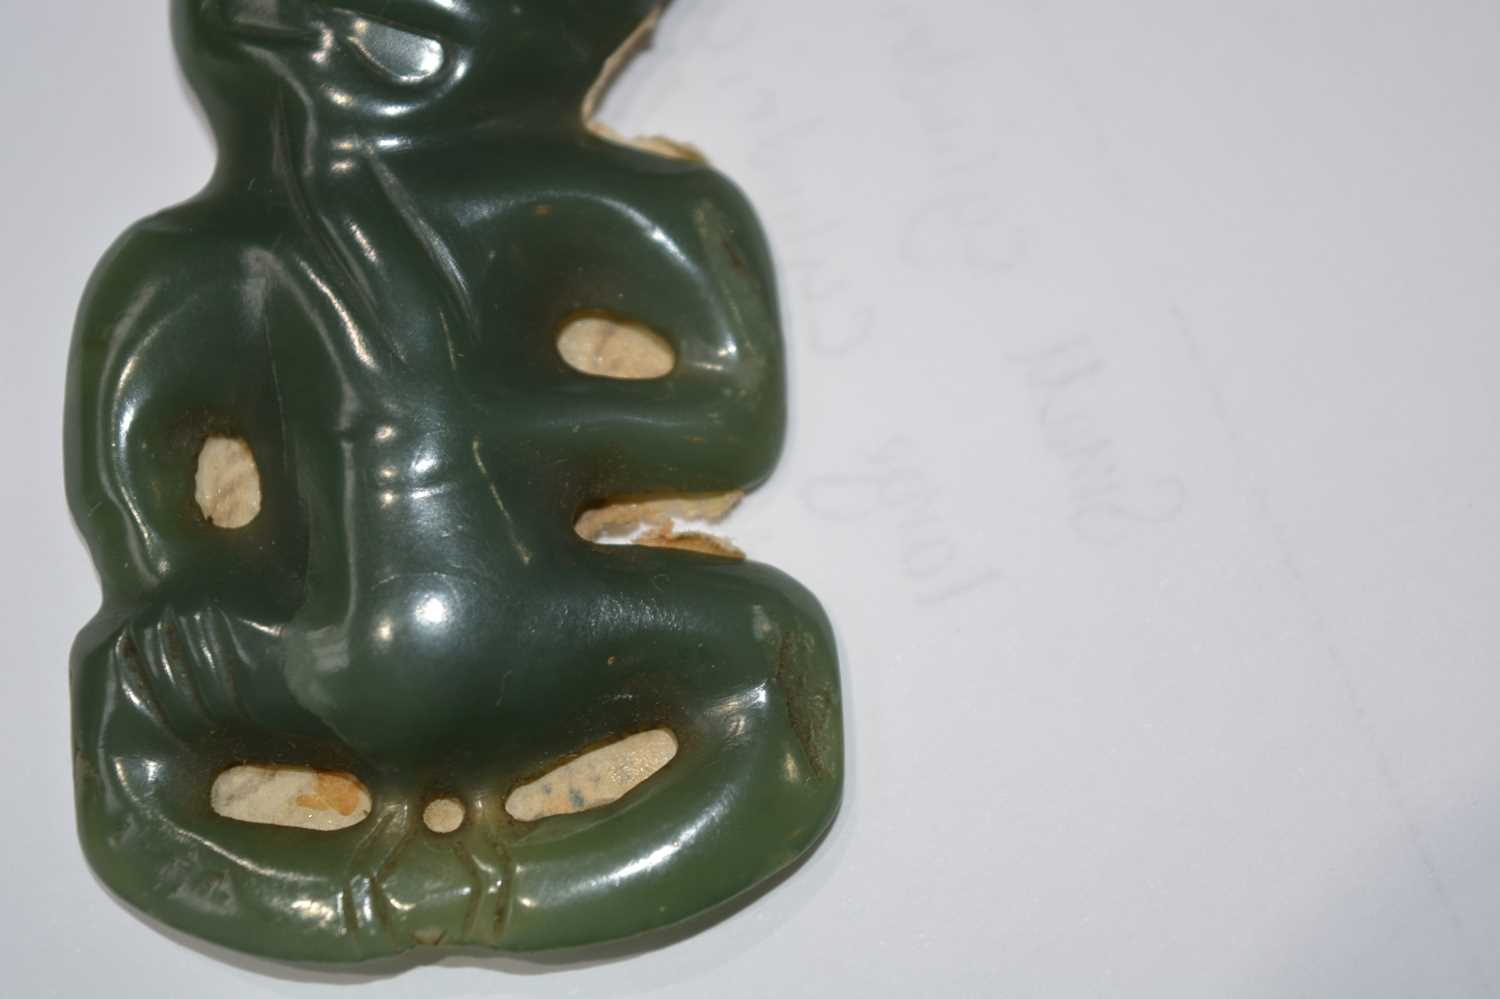 Maori hei-tiki pendant New Zealand, made of green nephrite, depicted with the head tilted to the - Image 12 of 16